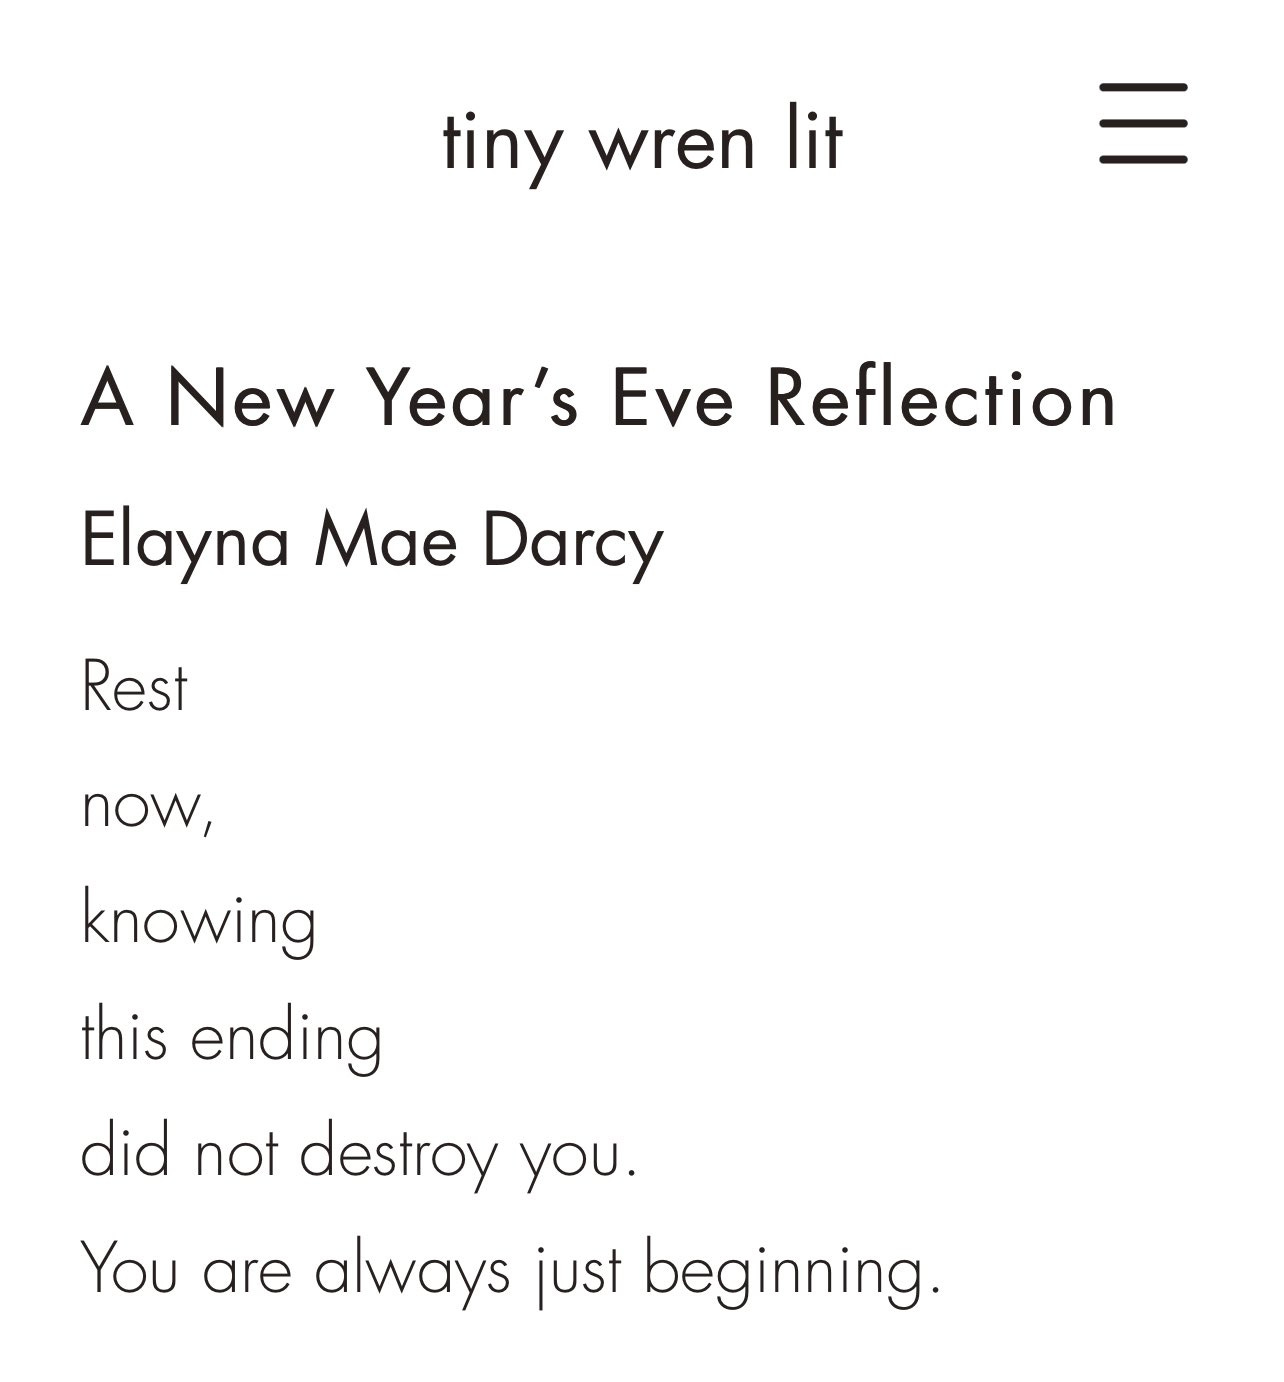 Screenshot of a white background with black text that says "tiny wren lit" in the header. Below it, it says, "A New Year's Eve Reflection" by Elayna Mae Darcy. The short poem reads: "Rest now, knowing this ending did not destroy you. You are always just beginning."